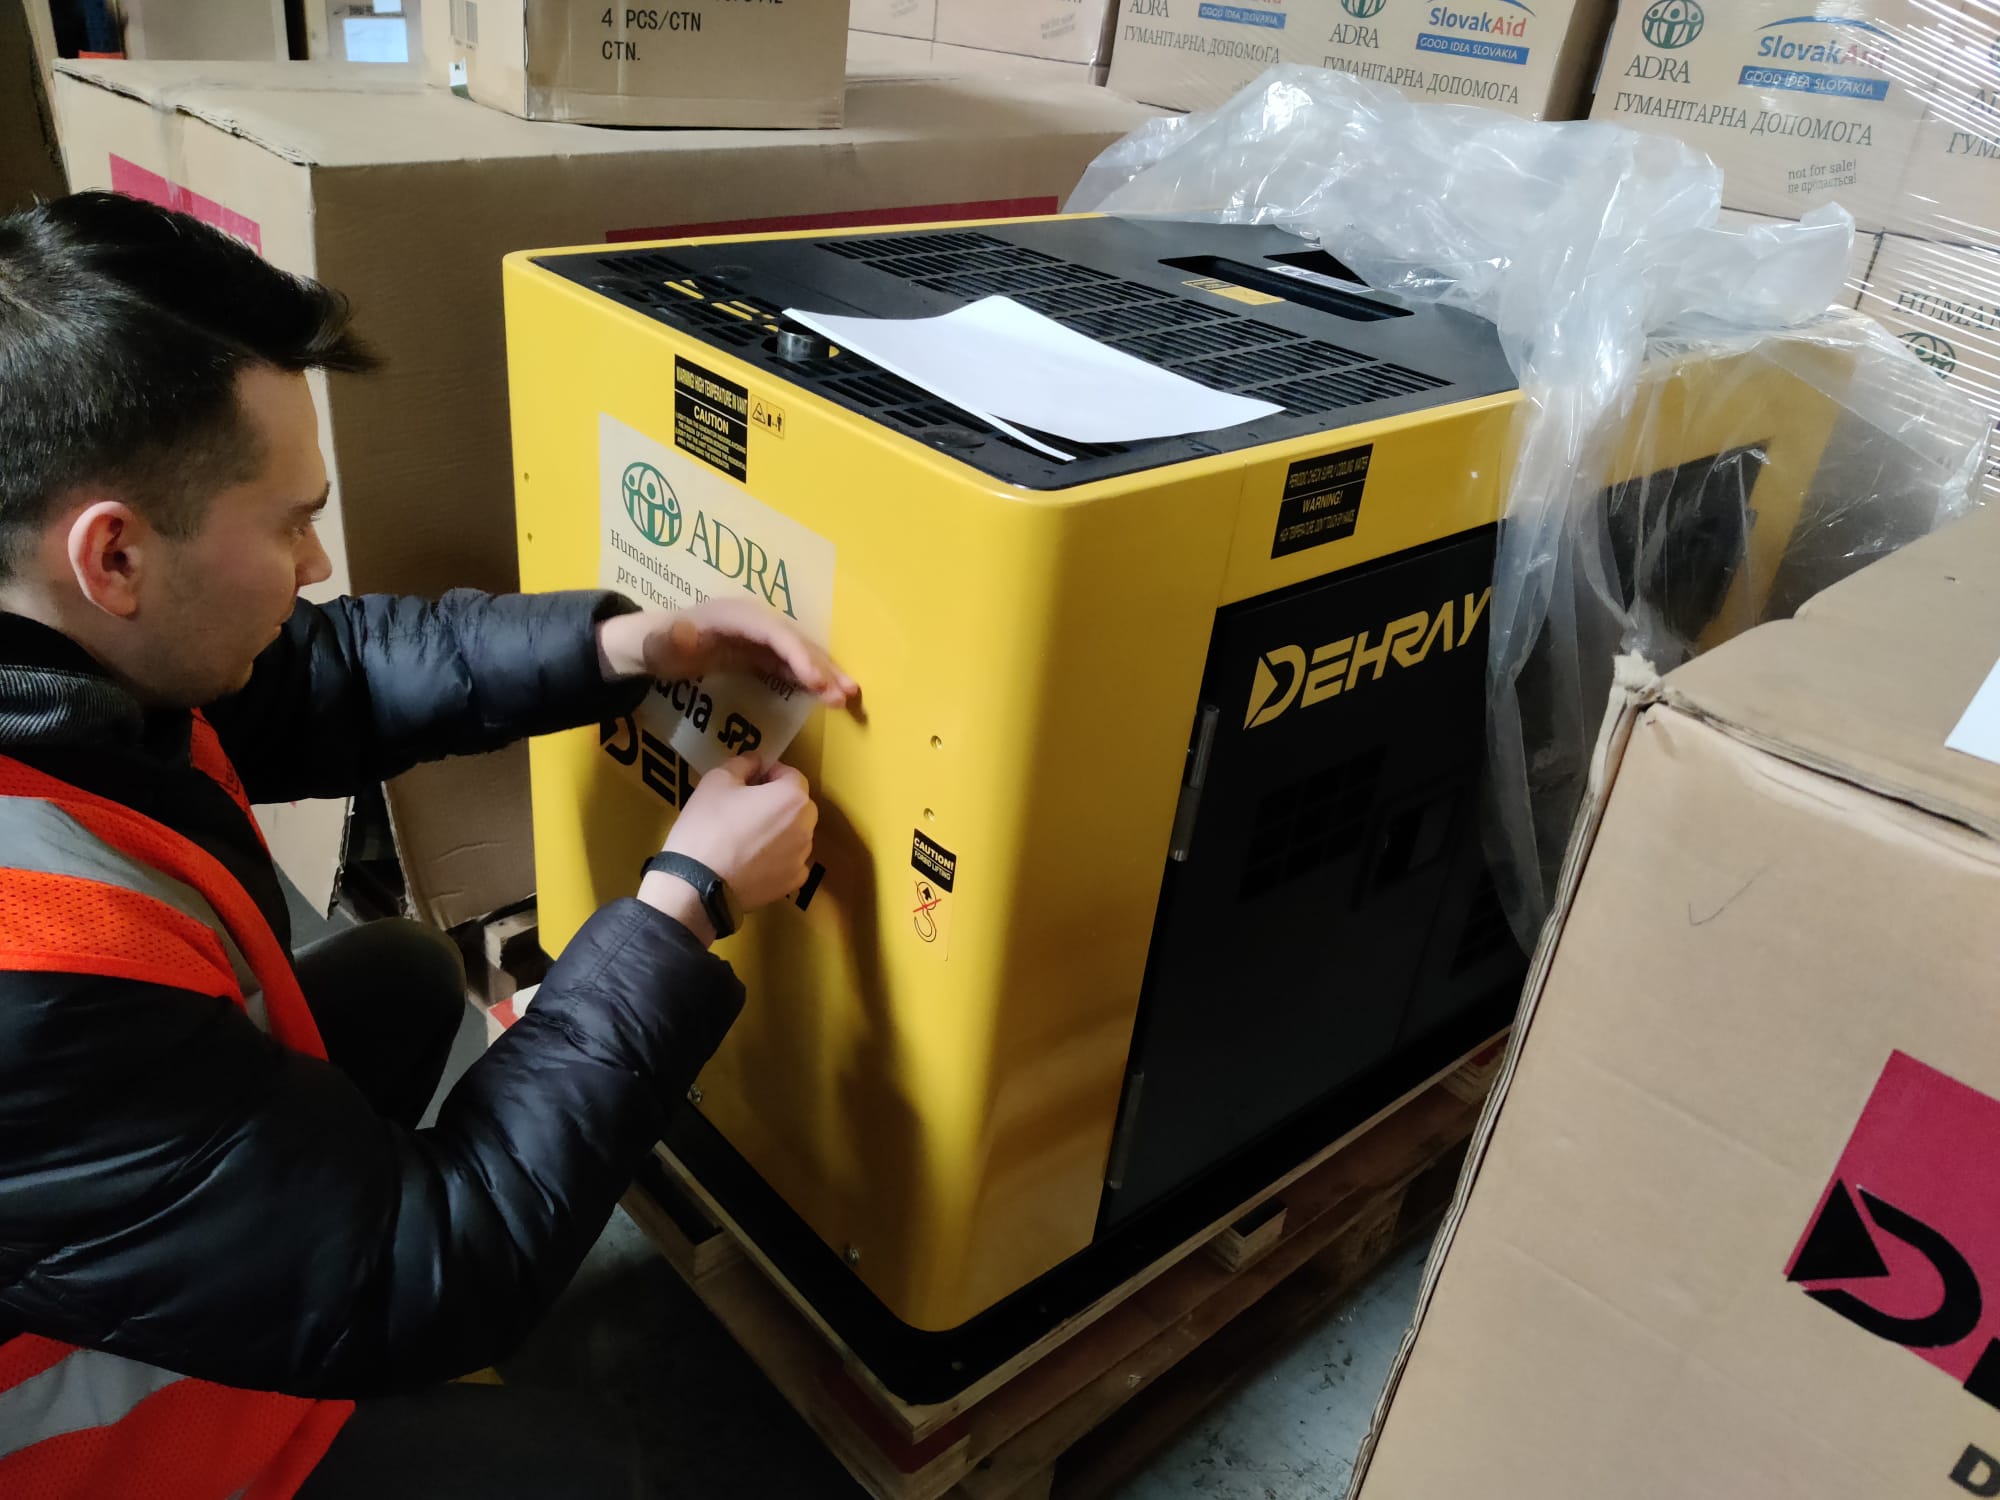 ADRA Slovakia launched a collection of electricity generators for Ukrainian hospitals in war-torn cities. The first twelve generators left Slovakia, heading to the city of Irpin.